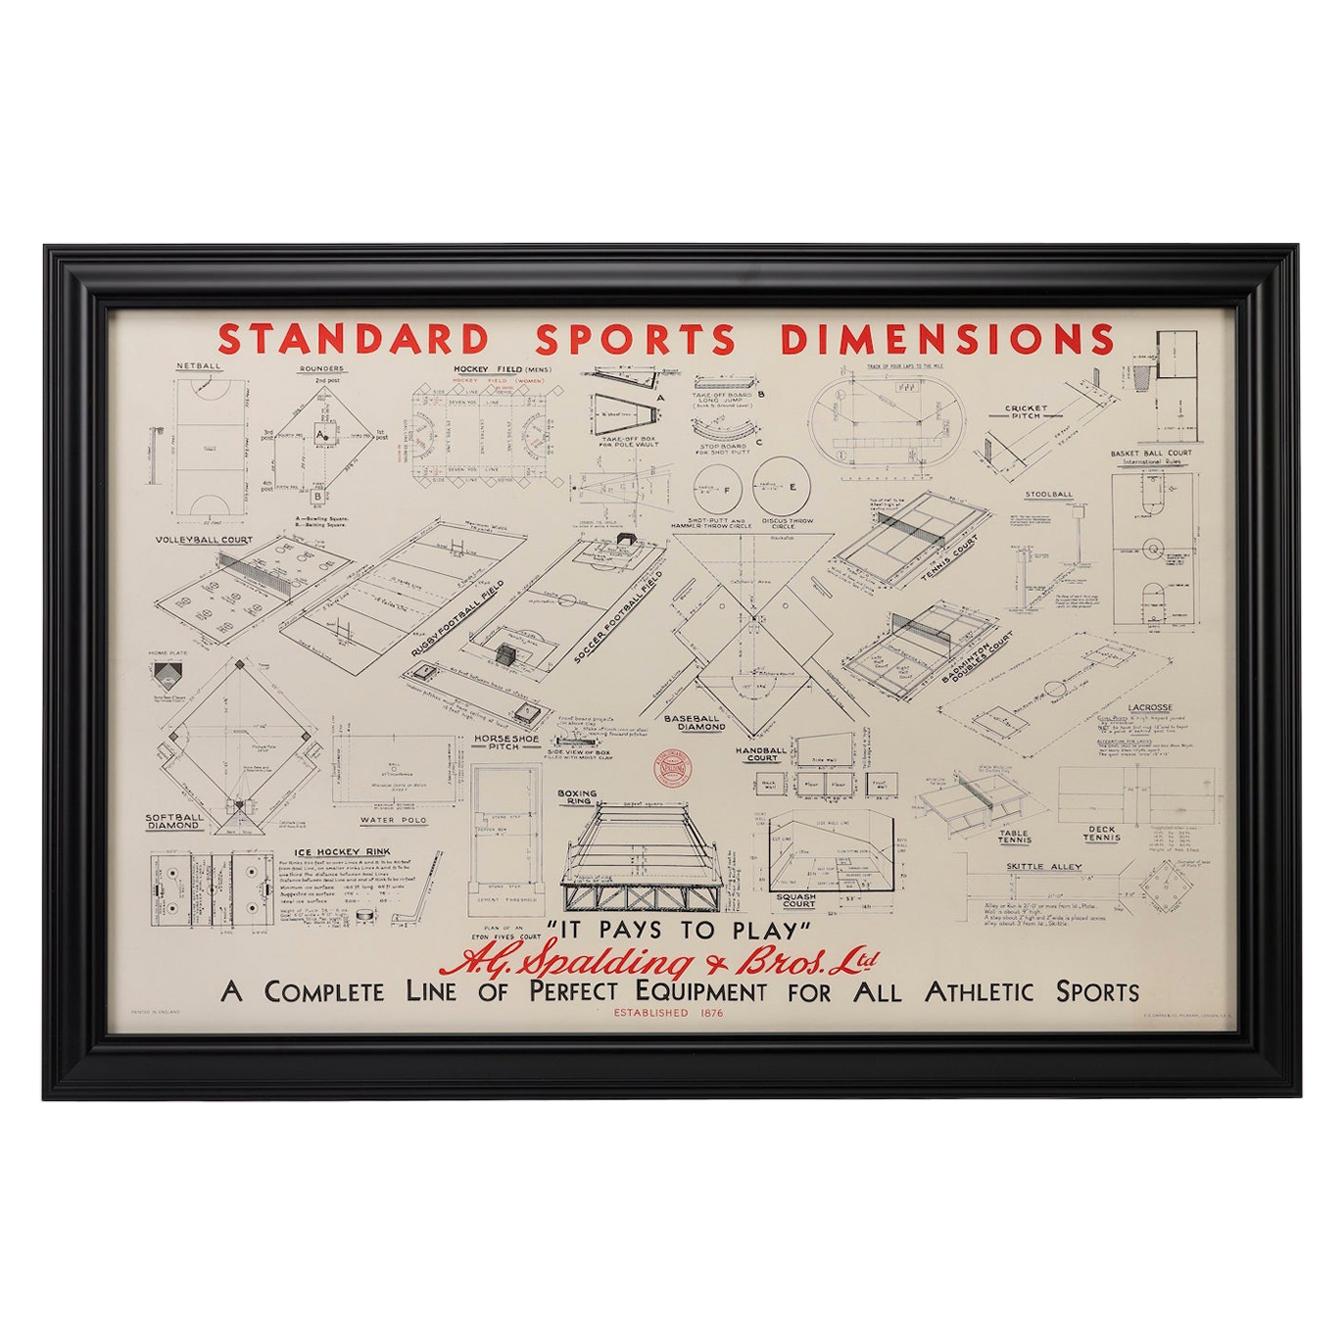 "Standard Sports Dimensions" A.G. Spalding & Bros, Vintage Poster, circa 1940s